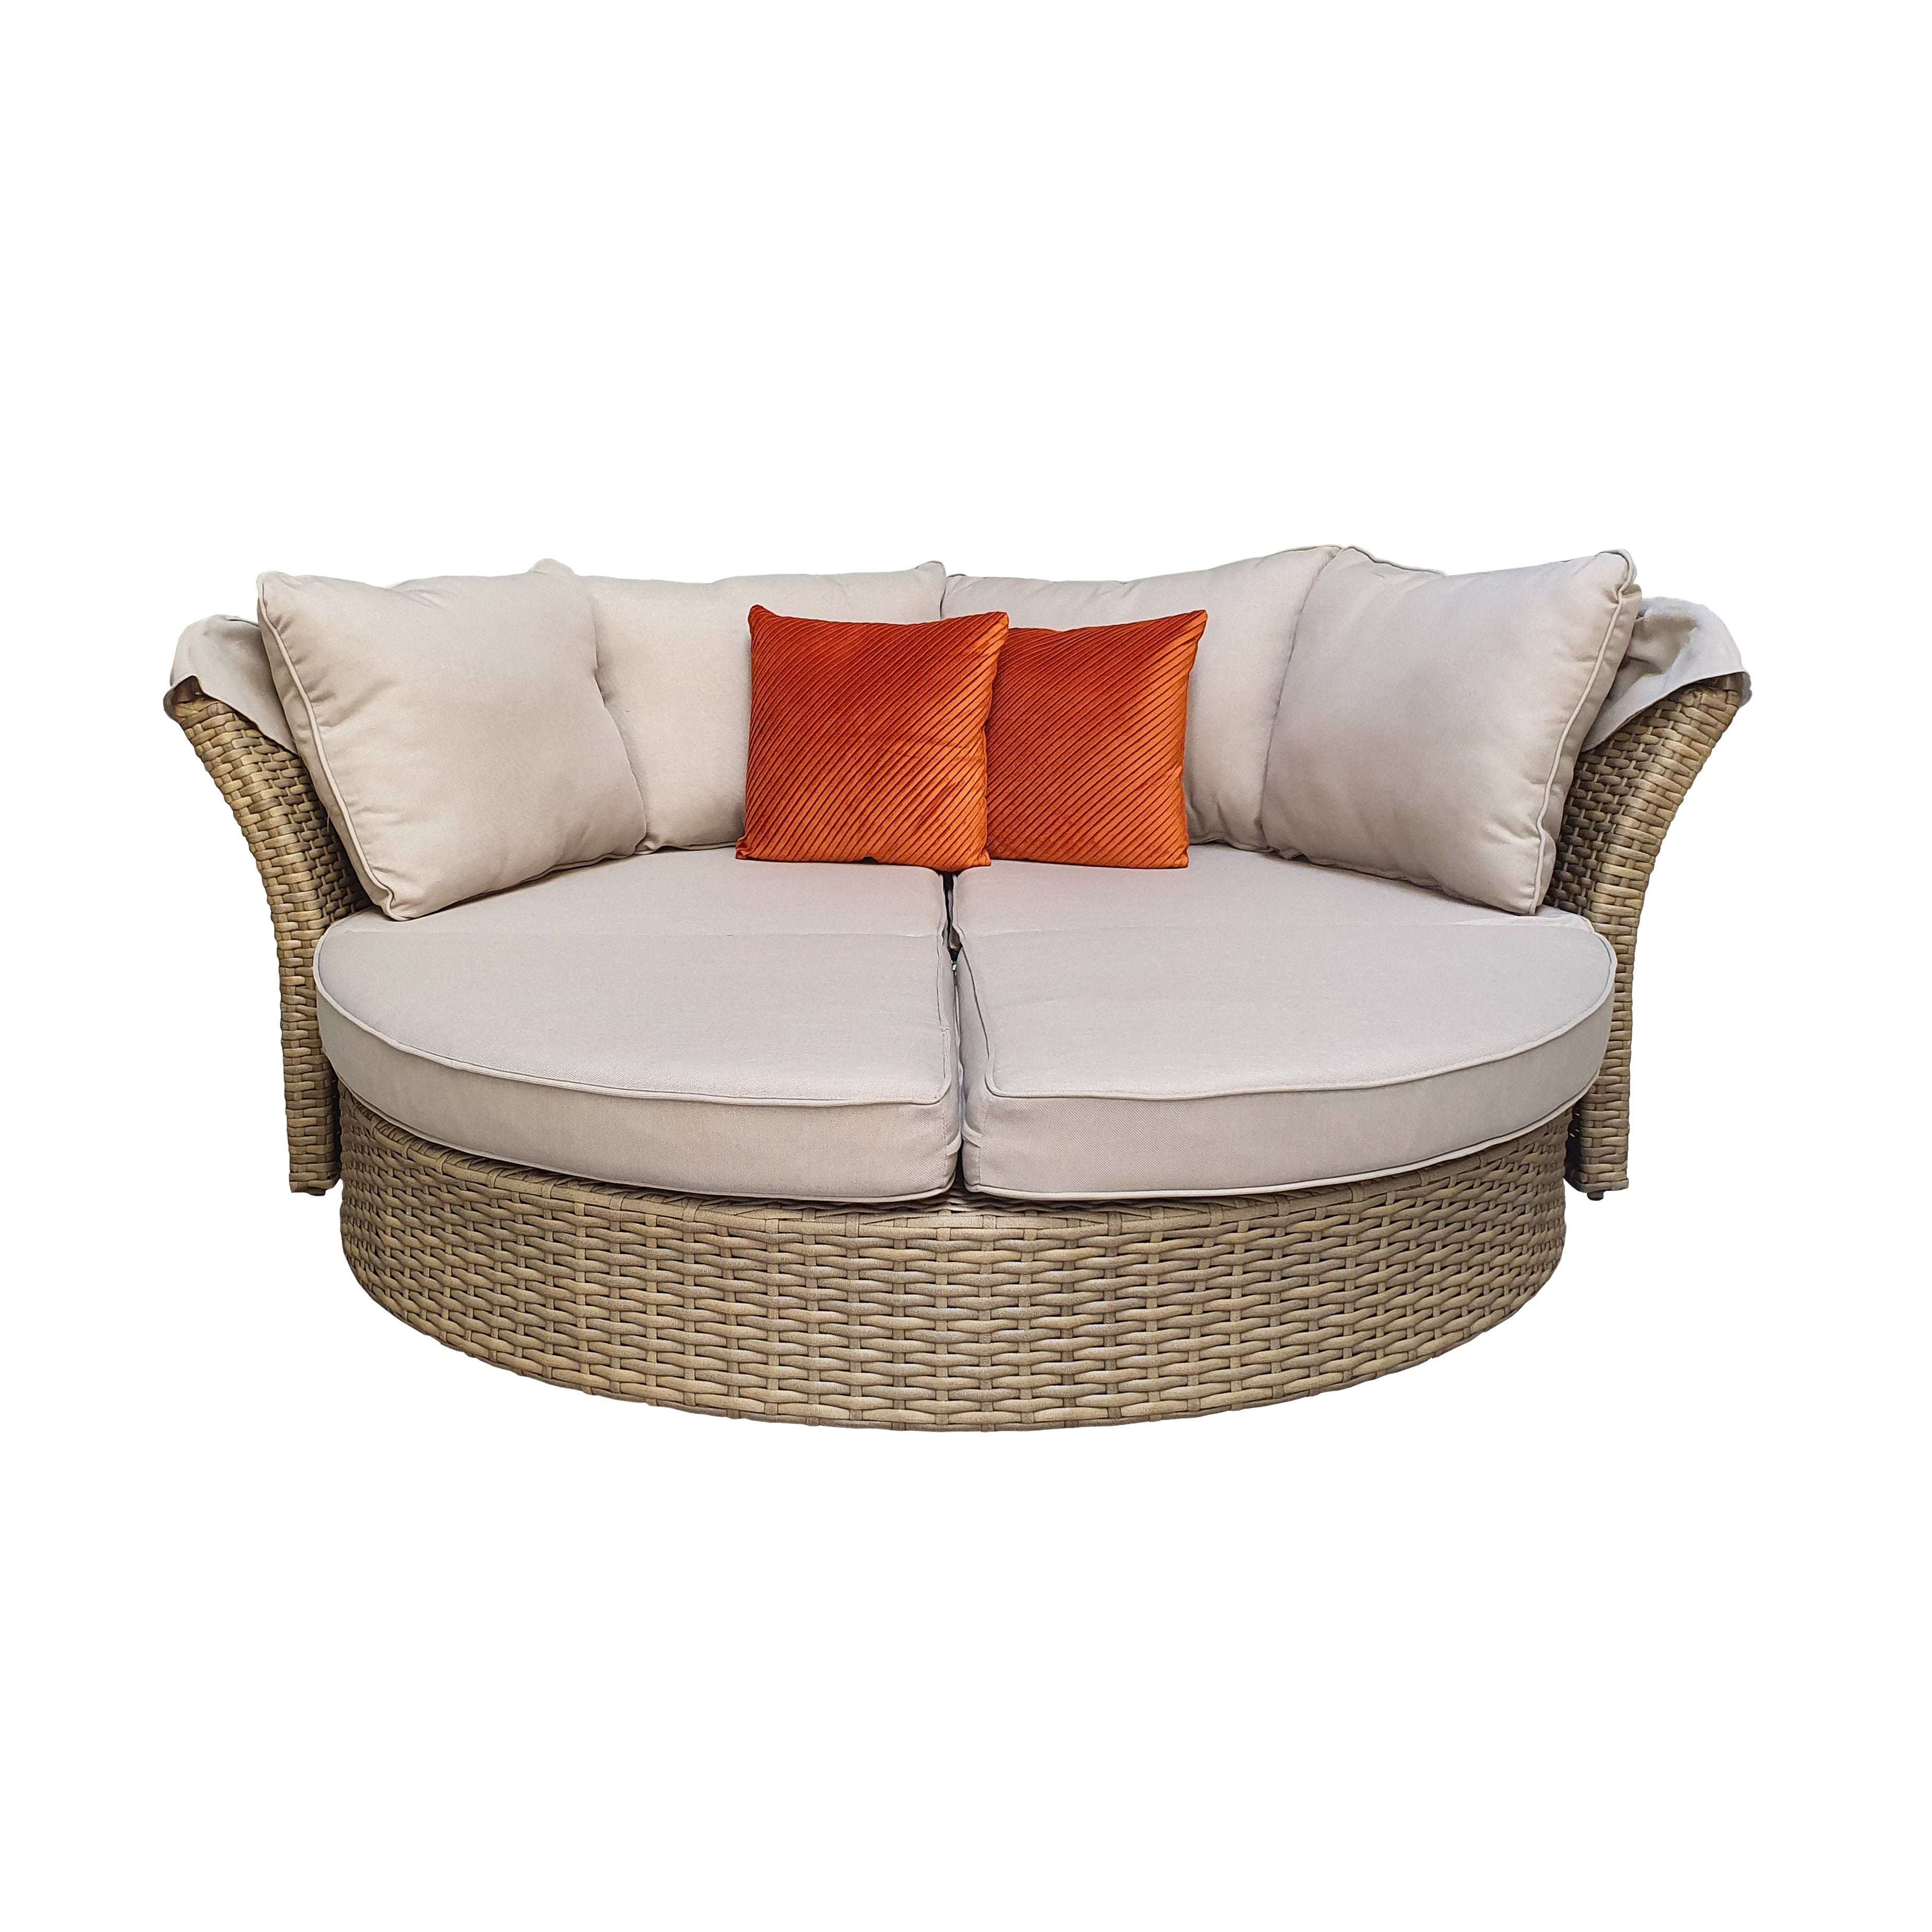 Exceptional Garden:Signature Weave Lilly Daybed - Nature